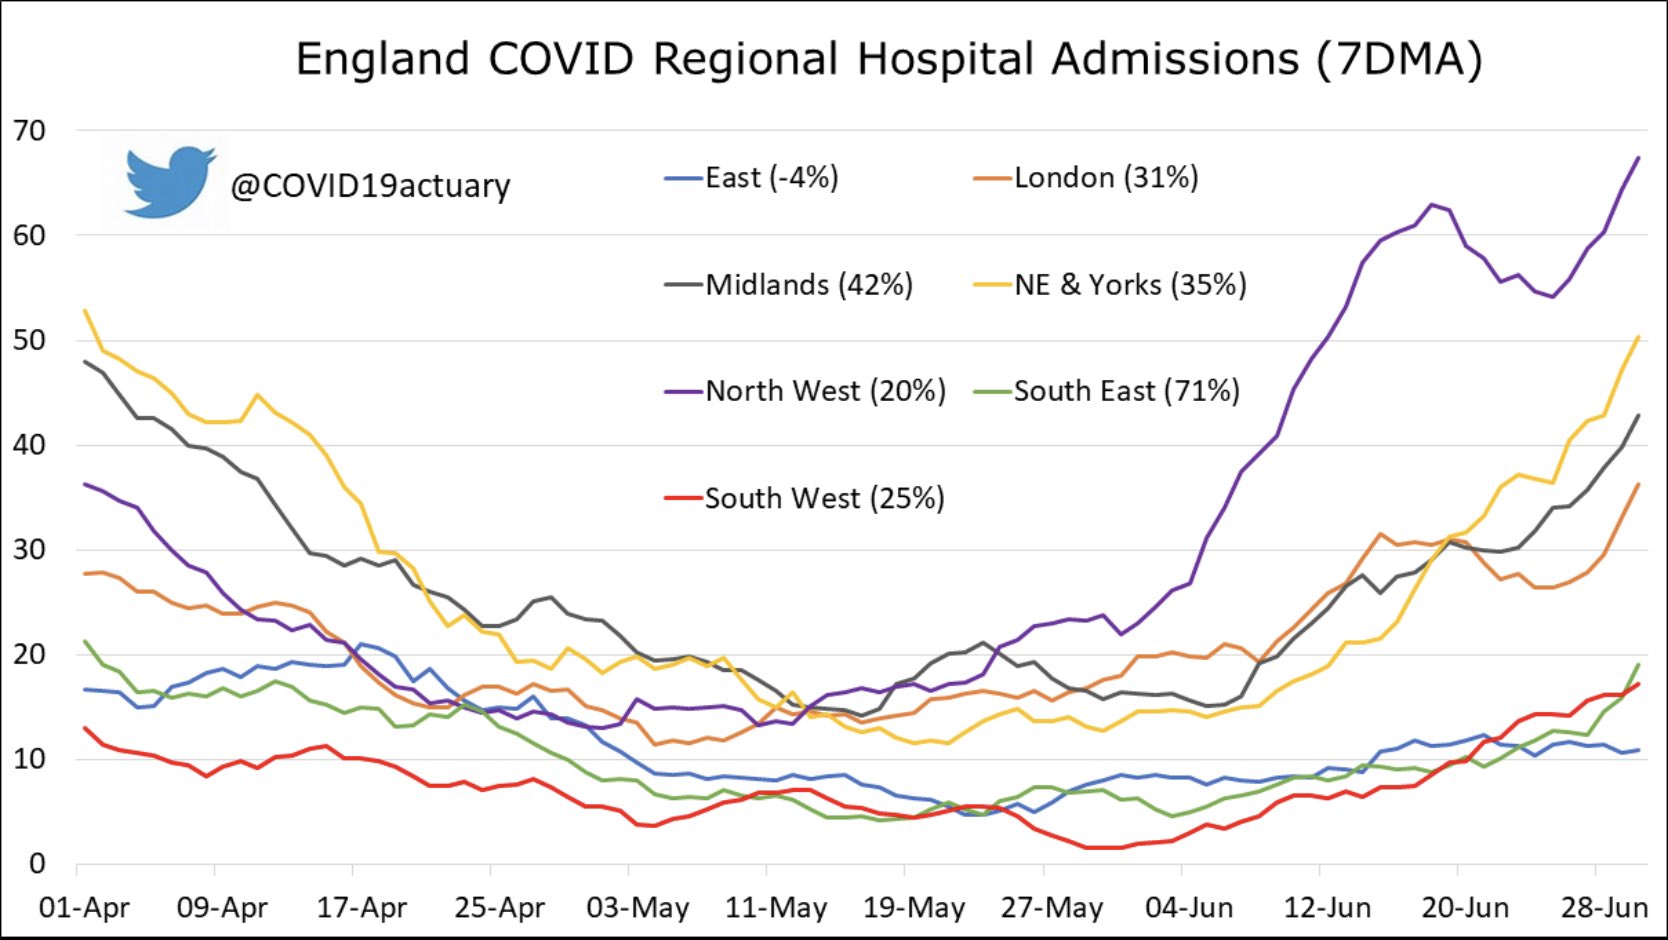 Chart showing increasing admissions in each English region